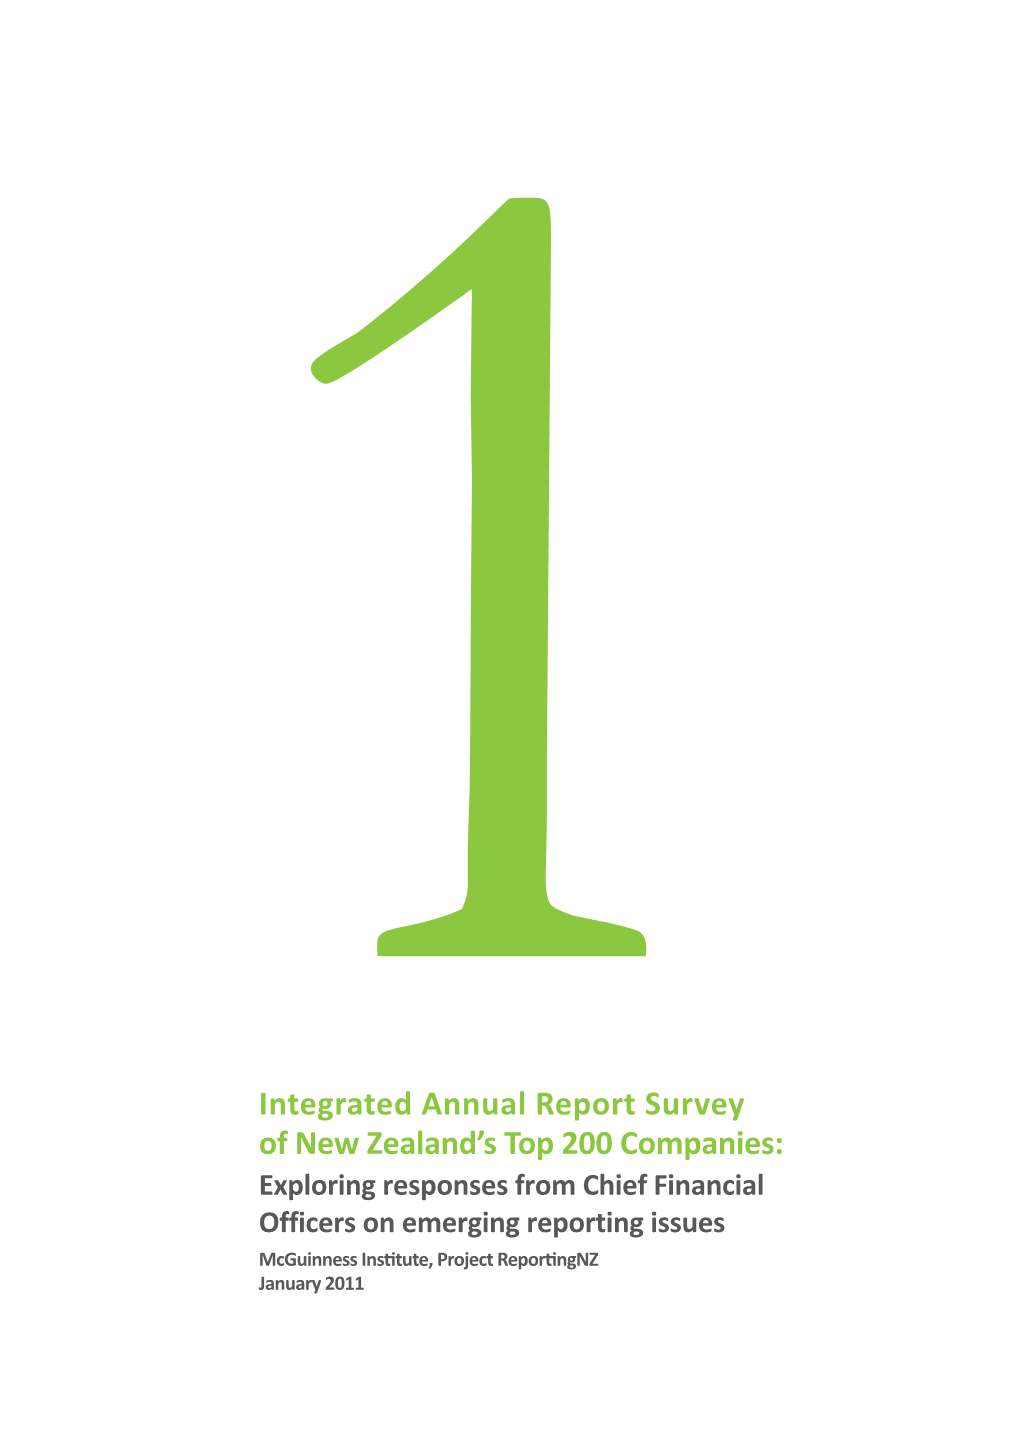 Integrated Annual Report Survey of New Zealand's Top 200 Companies